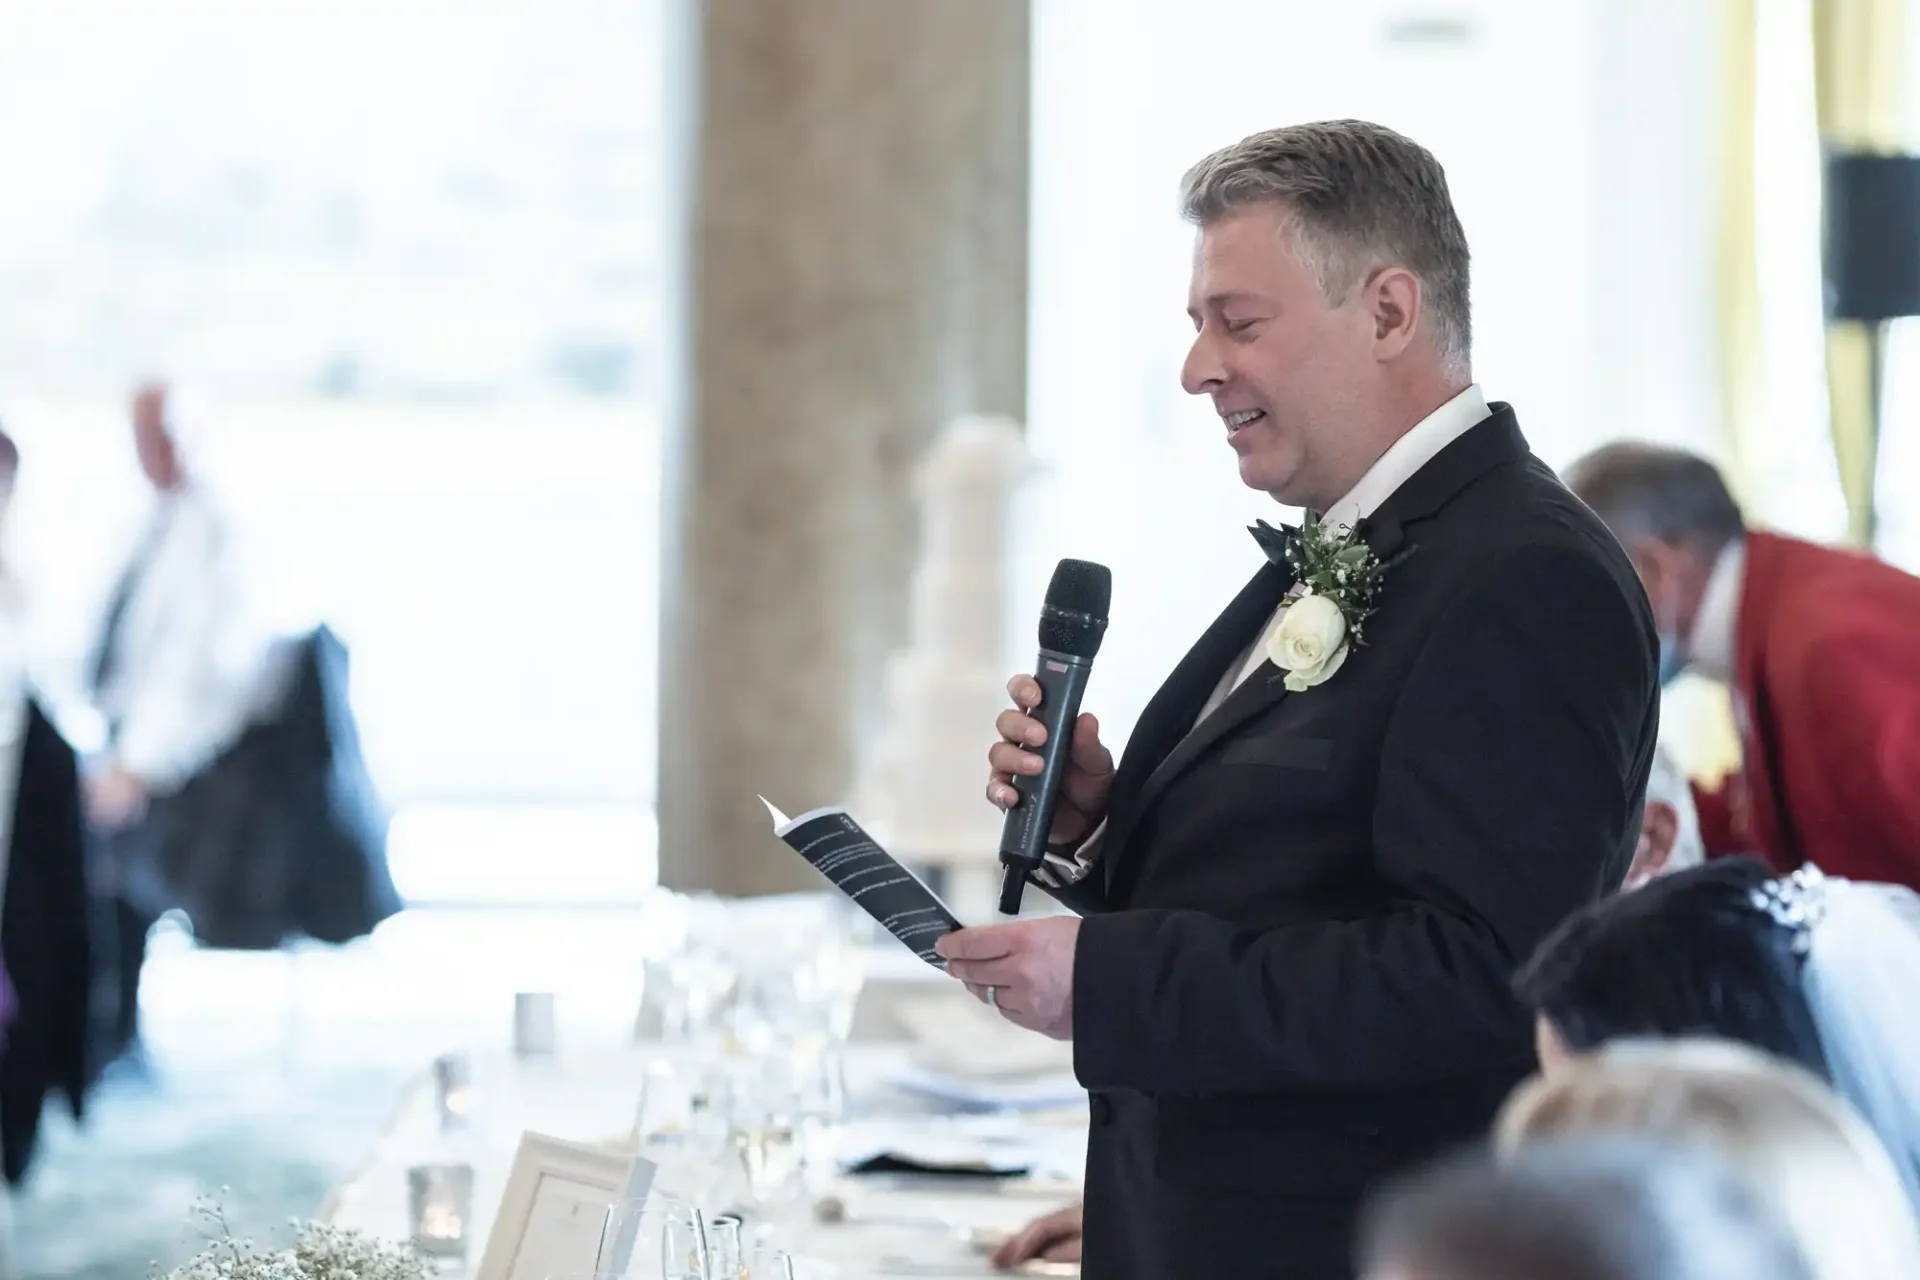 A man in a wedding suit gives a speech holding a microphone and a sheet of paper at a banquet hall.